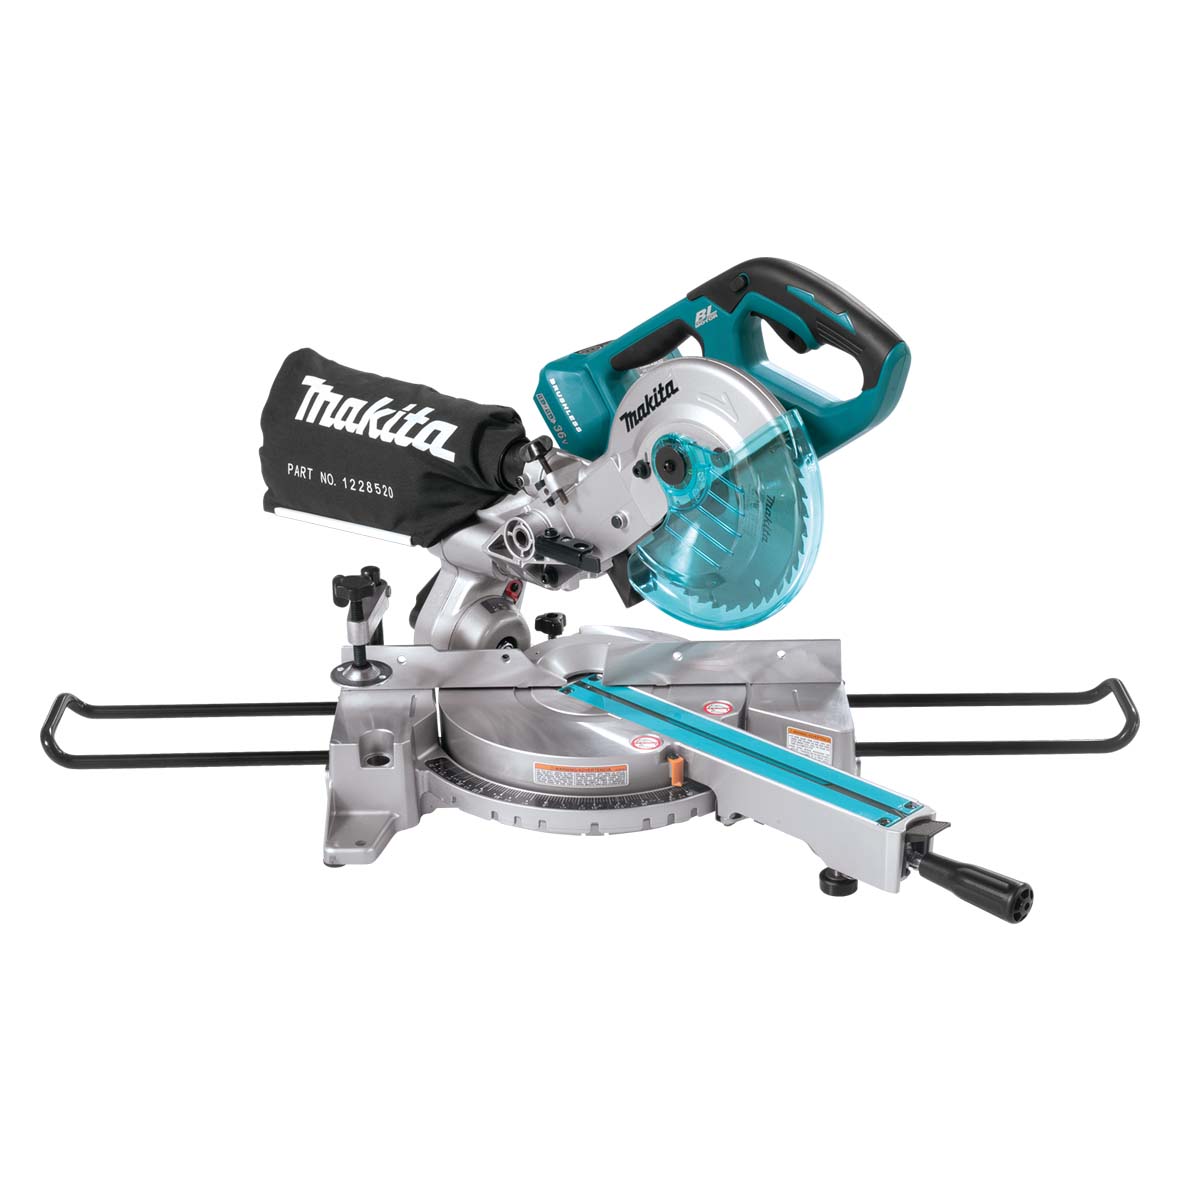 18Vx2 190mm (7-1/2") Brushless Slide Compound Mitre Saw Bare (Tool Only) DLS714Z by Makita